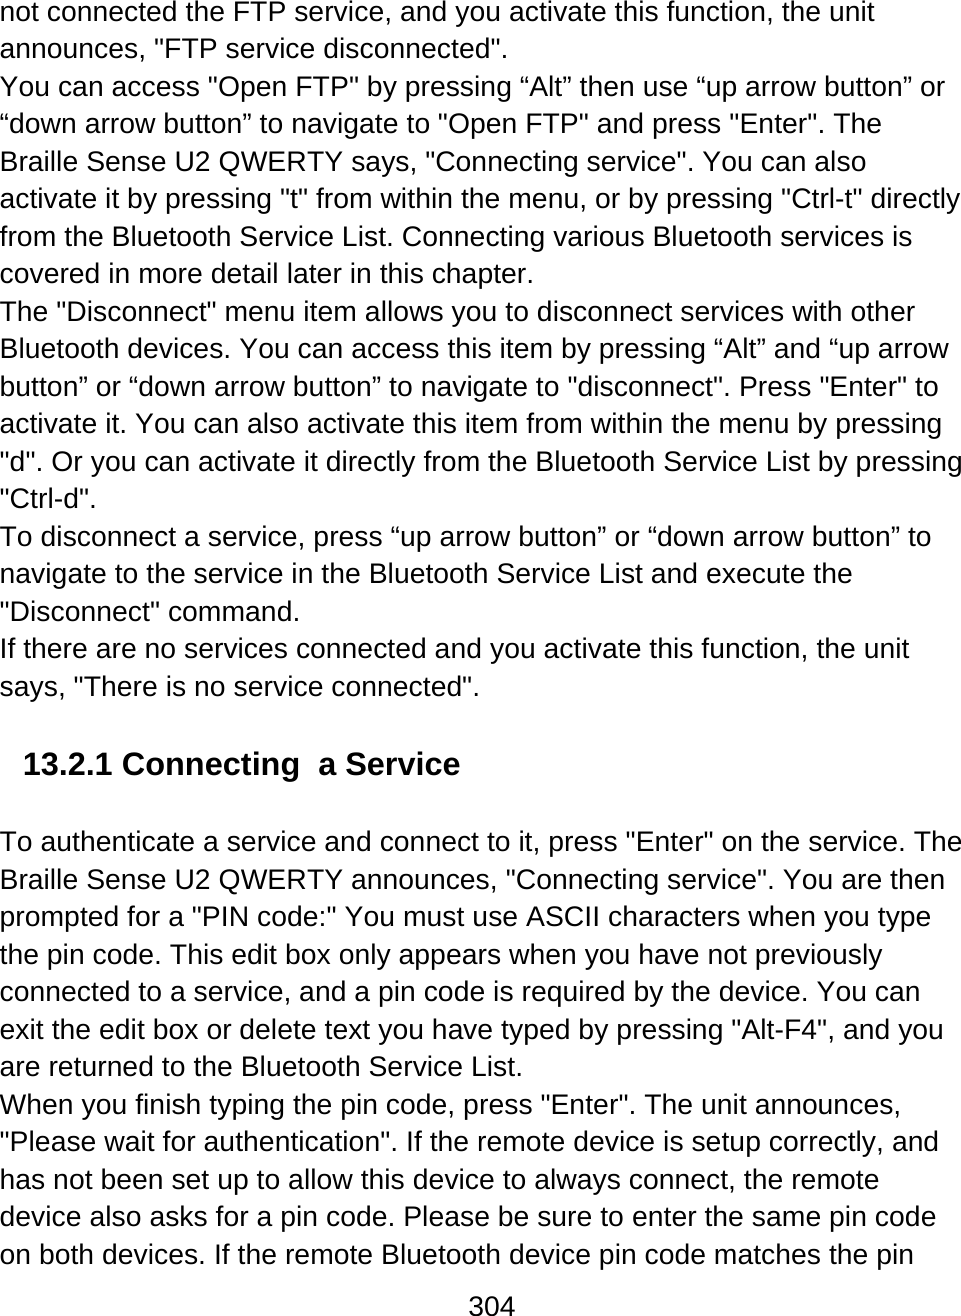 304  not connected the FTP service, and you activate this function, the unit announces, &quot;FTP service disconnected&quot;.  You can access &quot;Open FTP&quot; by pressing “Alt” then use “up arrow button” or “down arrow button” to navigate to &quot;Open FTP&quot; and press &quot;Enter&quot;. The Braille Sense U2 QWERTY says, &quot;Connecting service&quot;. You can also activate it by pressing &quot;t&quot; from within the menu, or by pressing &quot;Ctrl-t&quot; directly from the Bluetooth Service List. Connecting various Bluetooth services is covered in more detail later in this chapter. The &quot;Disconnect&quot; menu item allows you to disconnect services with other Bluetooth devices. You can access this item by pressing “Alt” and “up arrow button” or “down arrow button” to navigate to &quot;disconnect&quot;. Press &quot;Enter&quot; to activate it. You can also activate this item from within the menu by pressing &quot;d&quot;. Or you can activate it directly from the Bluetooth Service List by pressing &quot;Ctrl-d&quot;. To disconnect a service, press “up arrow button” or “down arrow button” to navigate to the service in the Bluetooth Service List and execute the &quot;Disconnect&quot; command. If there are no services connected and you activate this function, the unit says, &quot;There is no service connected&quot;.  13.2.1 Connecting  a Service  To authenticate a service and connect to it, press &quot;Enter&quot; on the service. The Braille Sense U2 QWERTY announces, &quot;Connecting service&quot;. You are then prompted for a &quot;PIN code:&quot; You must use ASCII characters when you type the pin code. This edit box only appears when you have not previously connected to a service, and a pin code is required by the device. You can exit the edit box or delete text you have typed by pressing &quot;Alt-F4&quot;, and you are returned to the Bluetooth Service List. When you finish typing the pin code, press &quot;Enter&quot;. The unit announces, &quot;Please wait for authentication&quot;. If the remote device is setup correctly, and has not been set up to allow this device to always connect, the remote device also asks for a pin code. Please be sure to enter the same pin code on both devices. If the remote Bluetooth device pin code matches the pin 